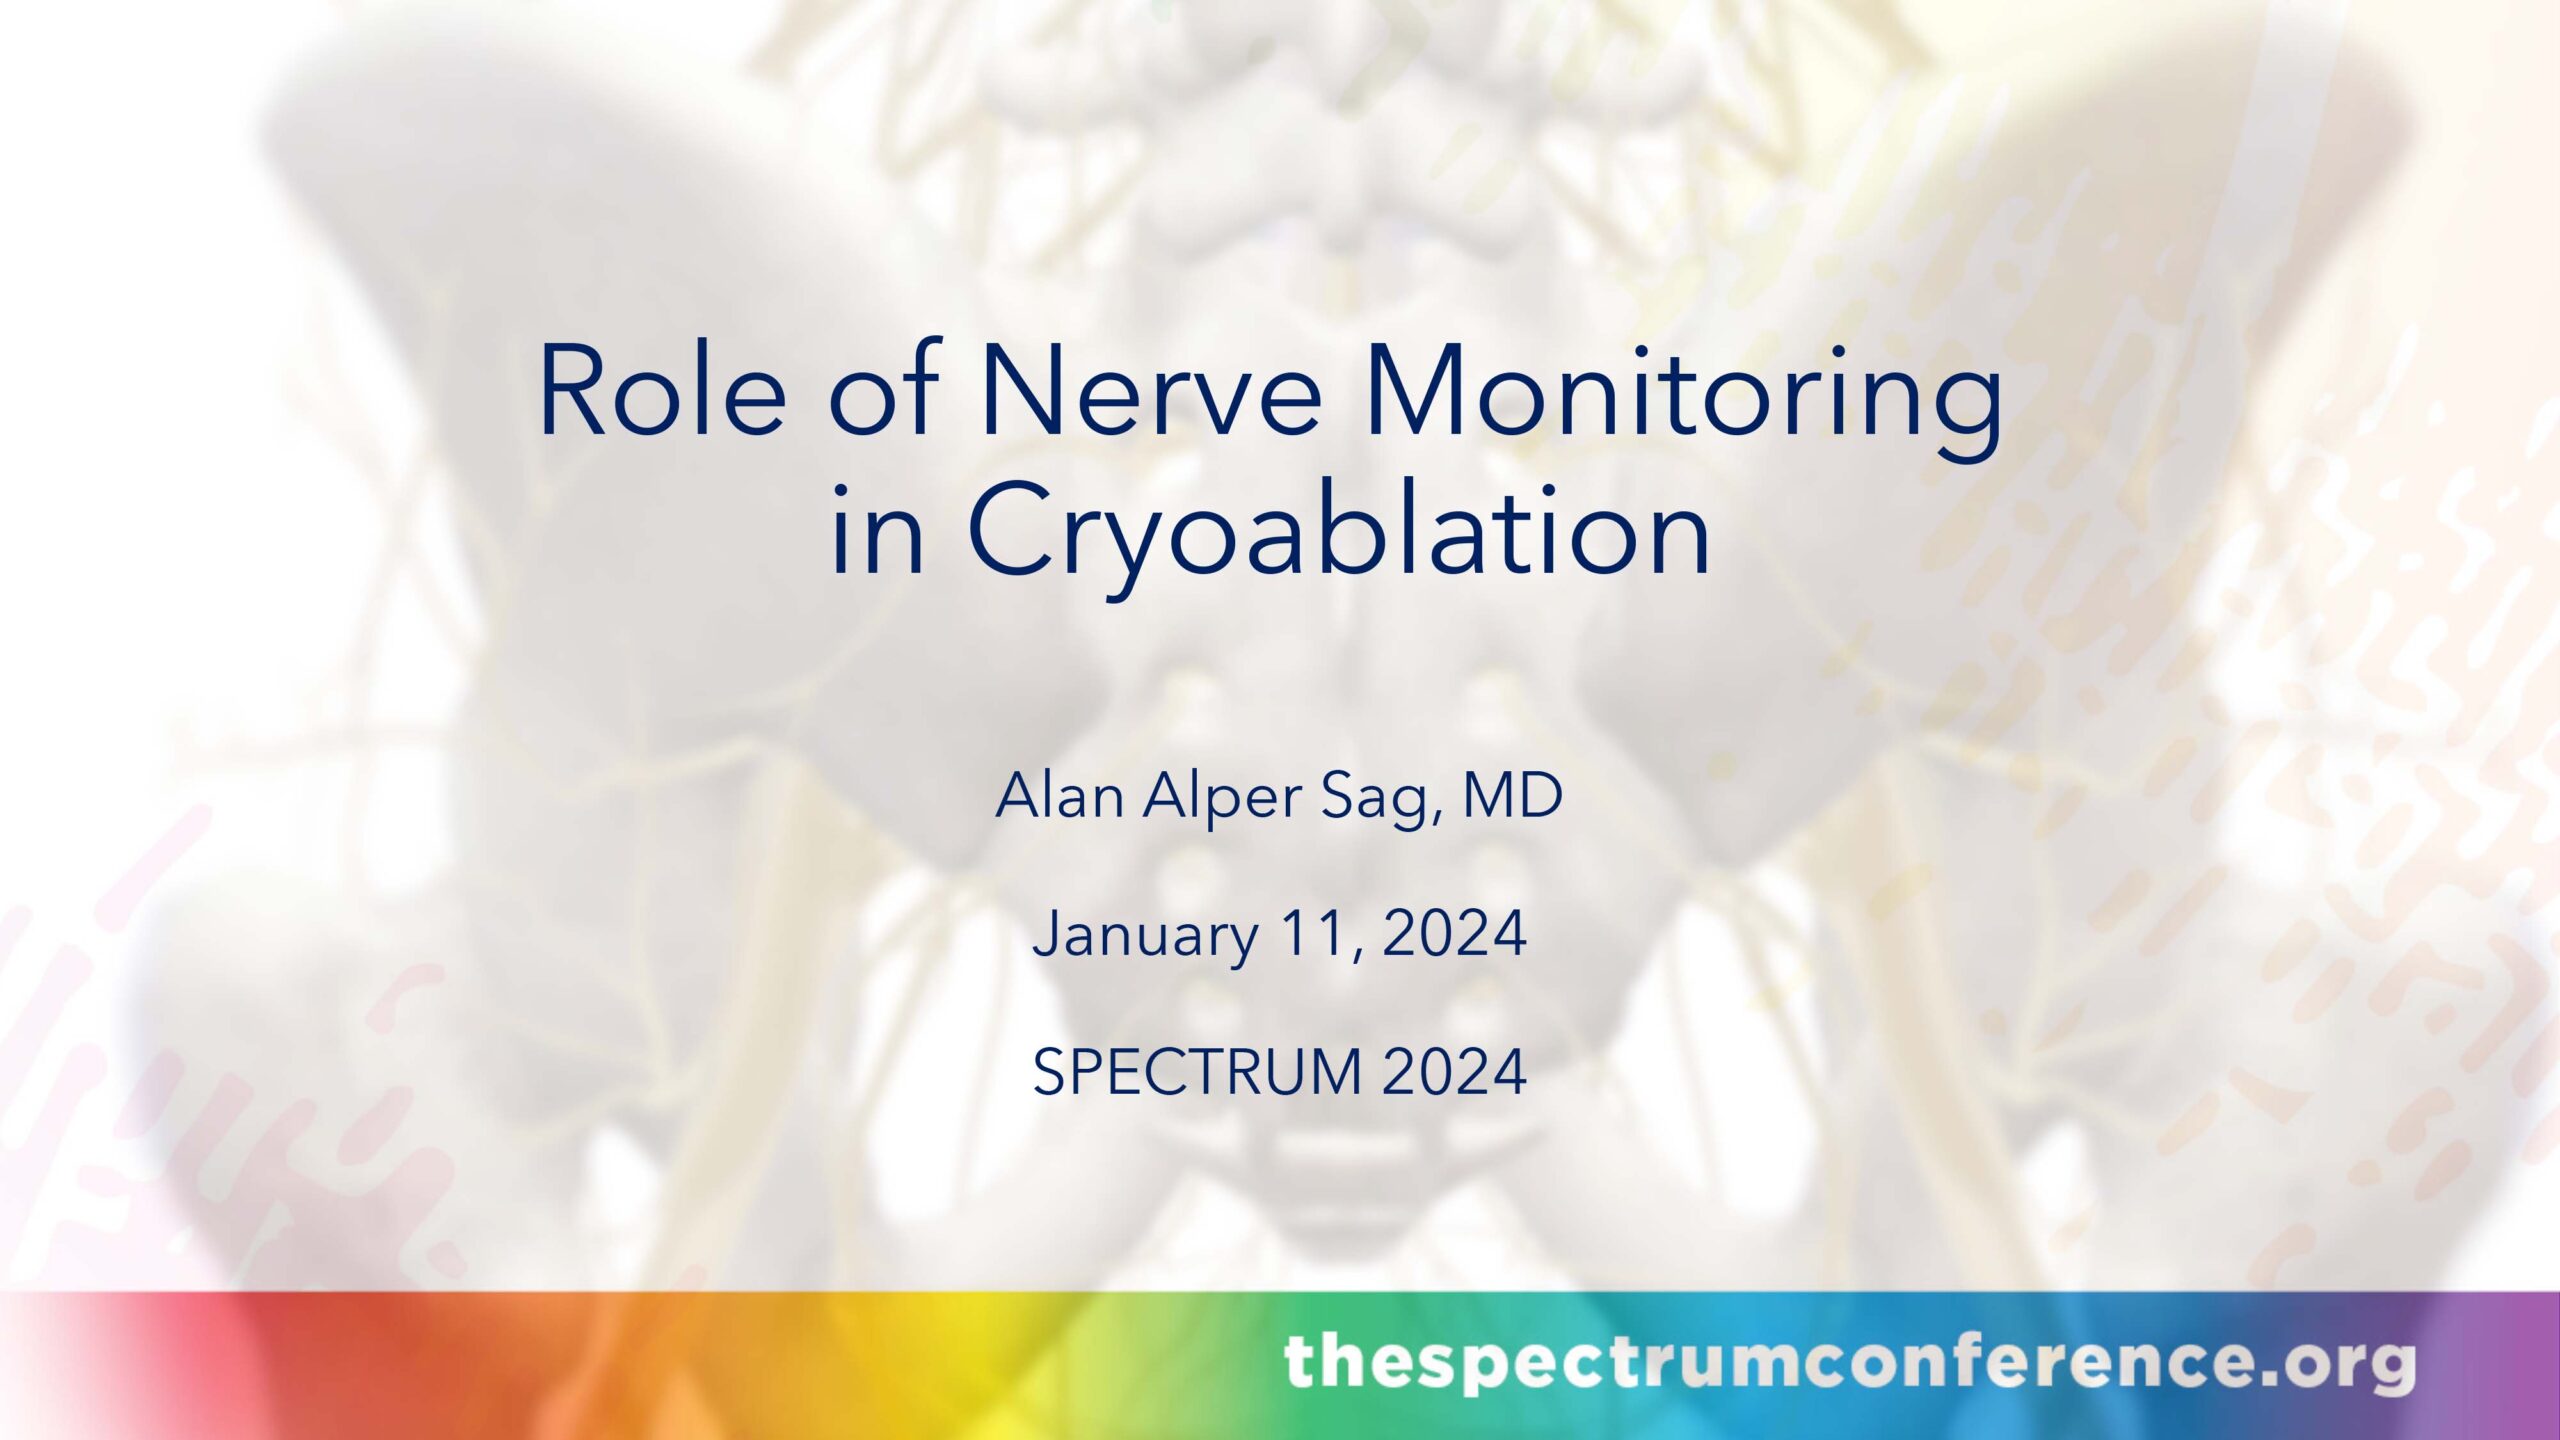 Role of Nerve monitoring in Cryoablation